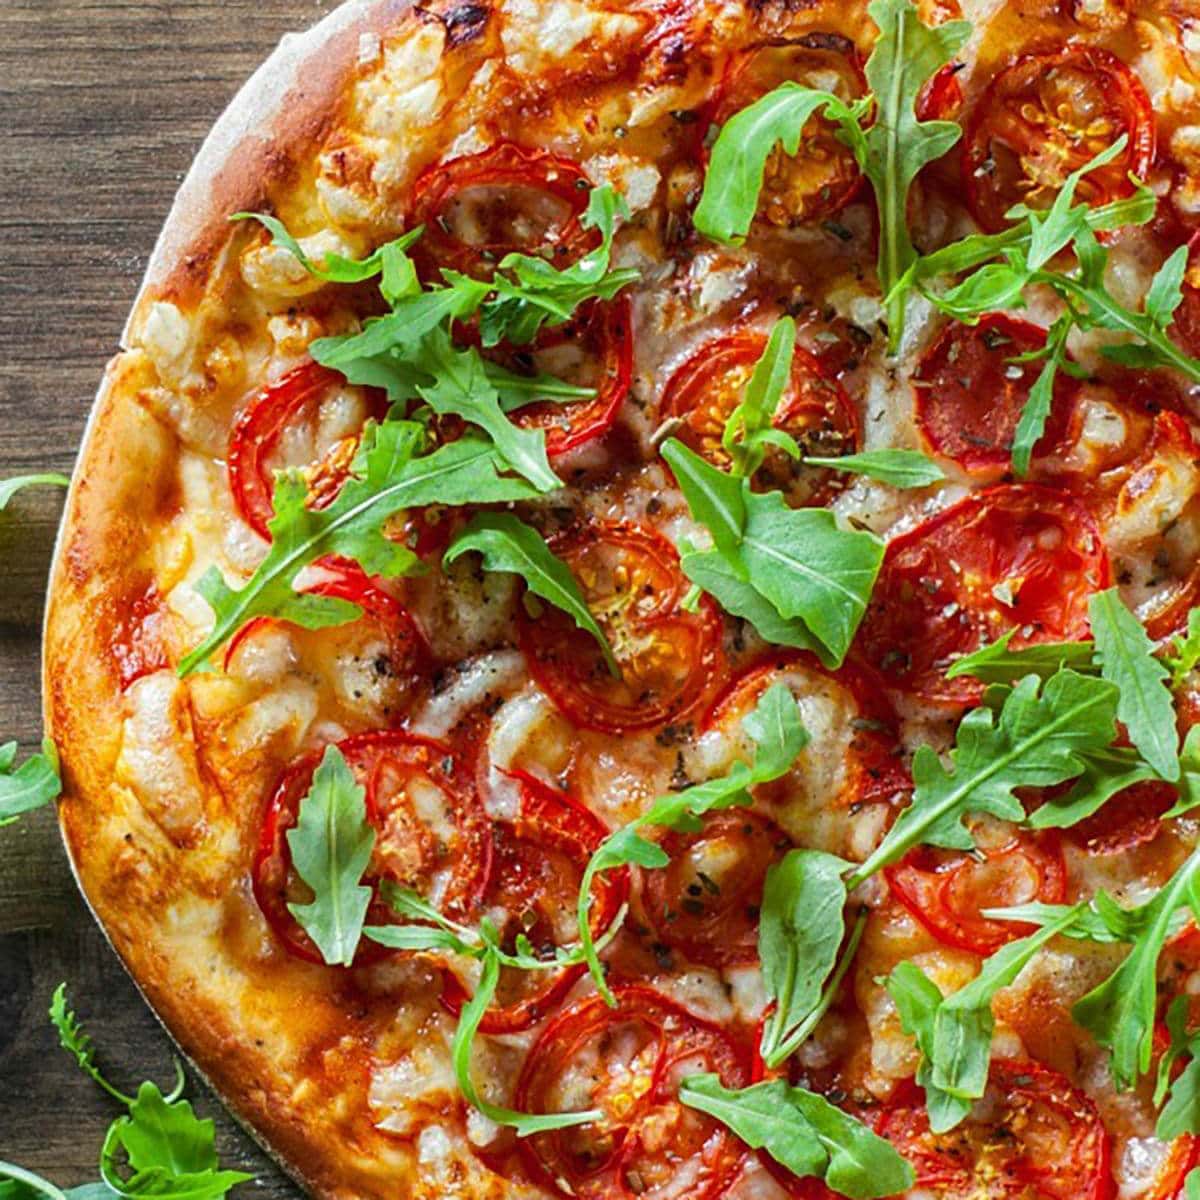 Homemade Pizza topped with tomatoes and arugula